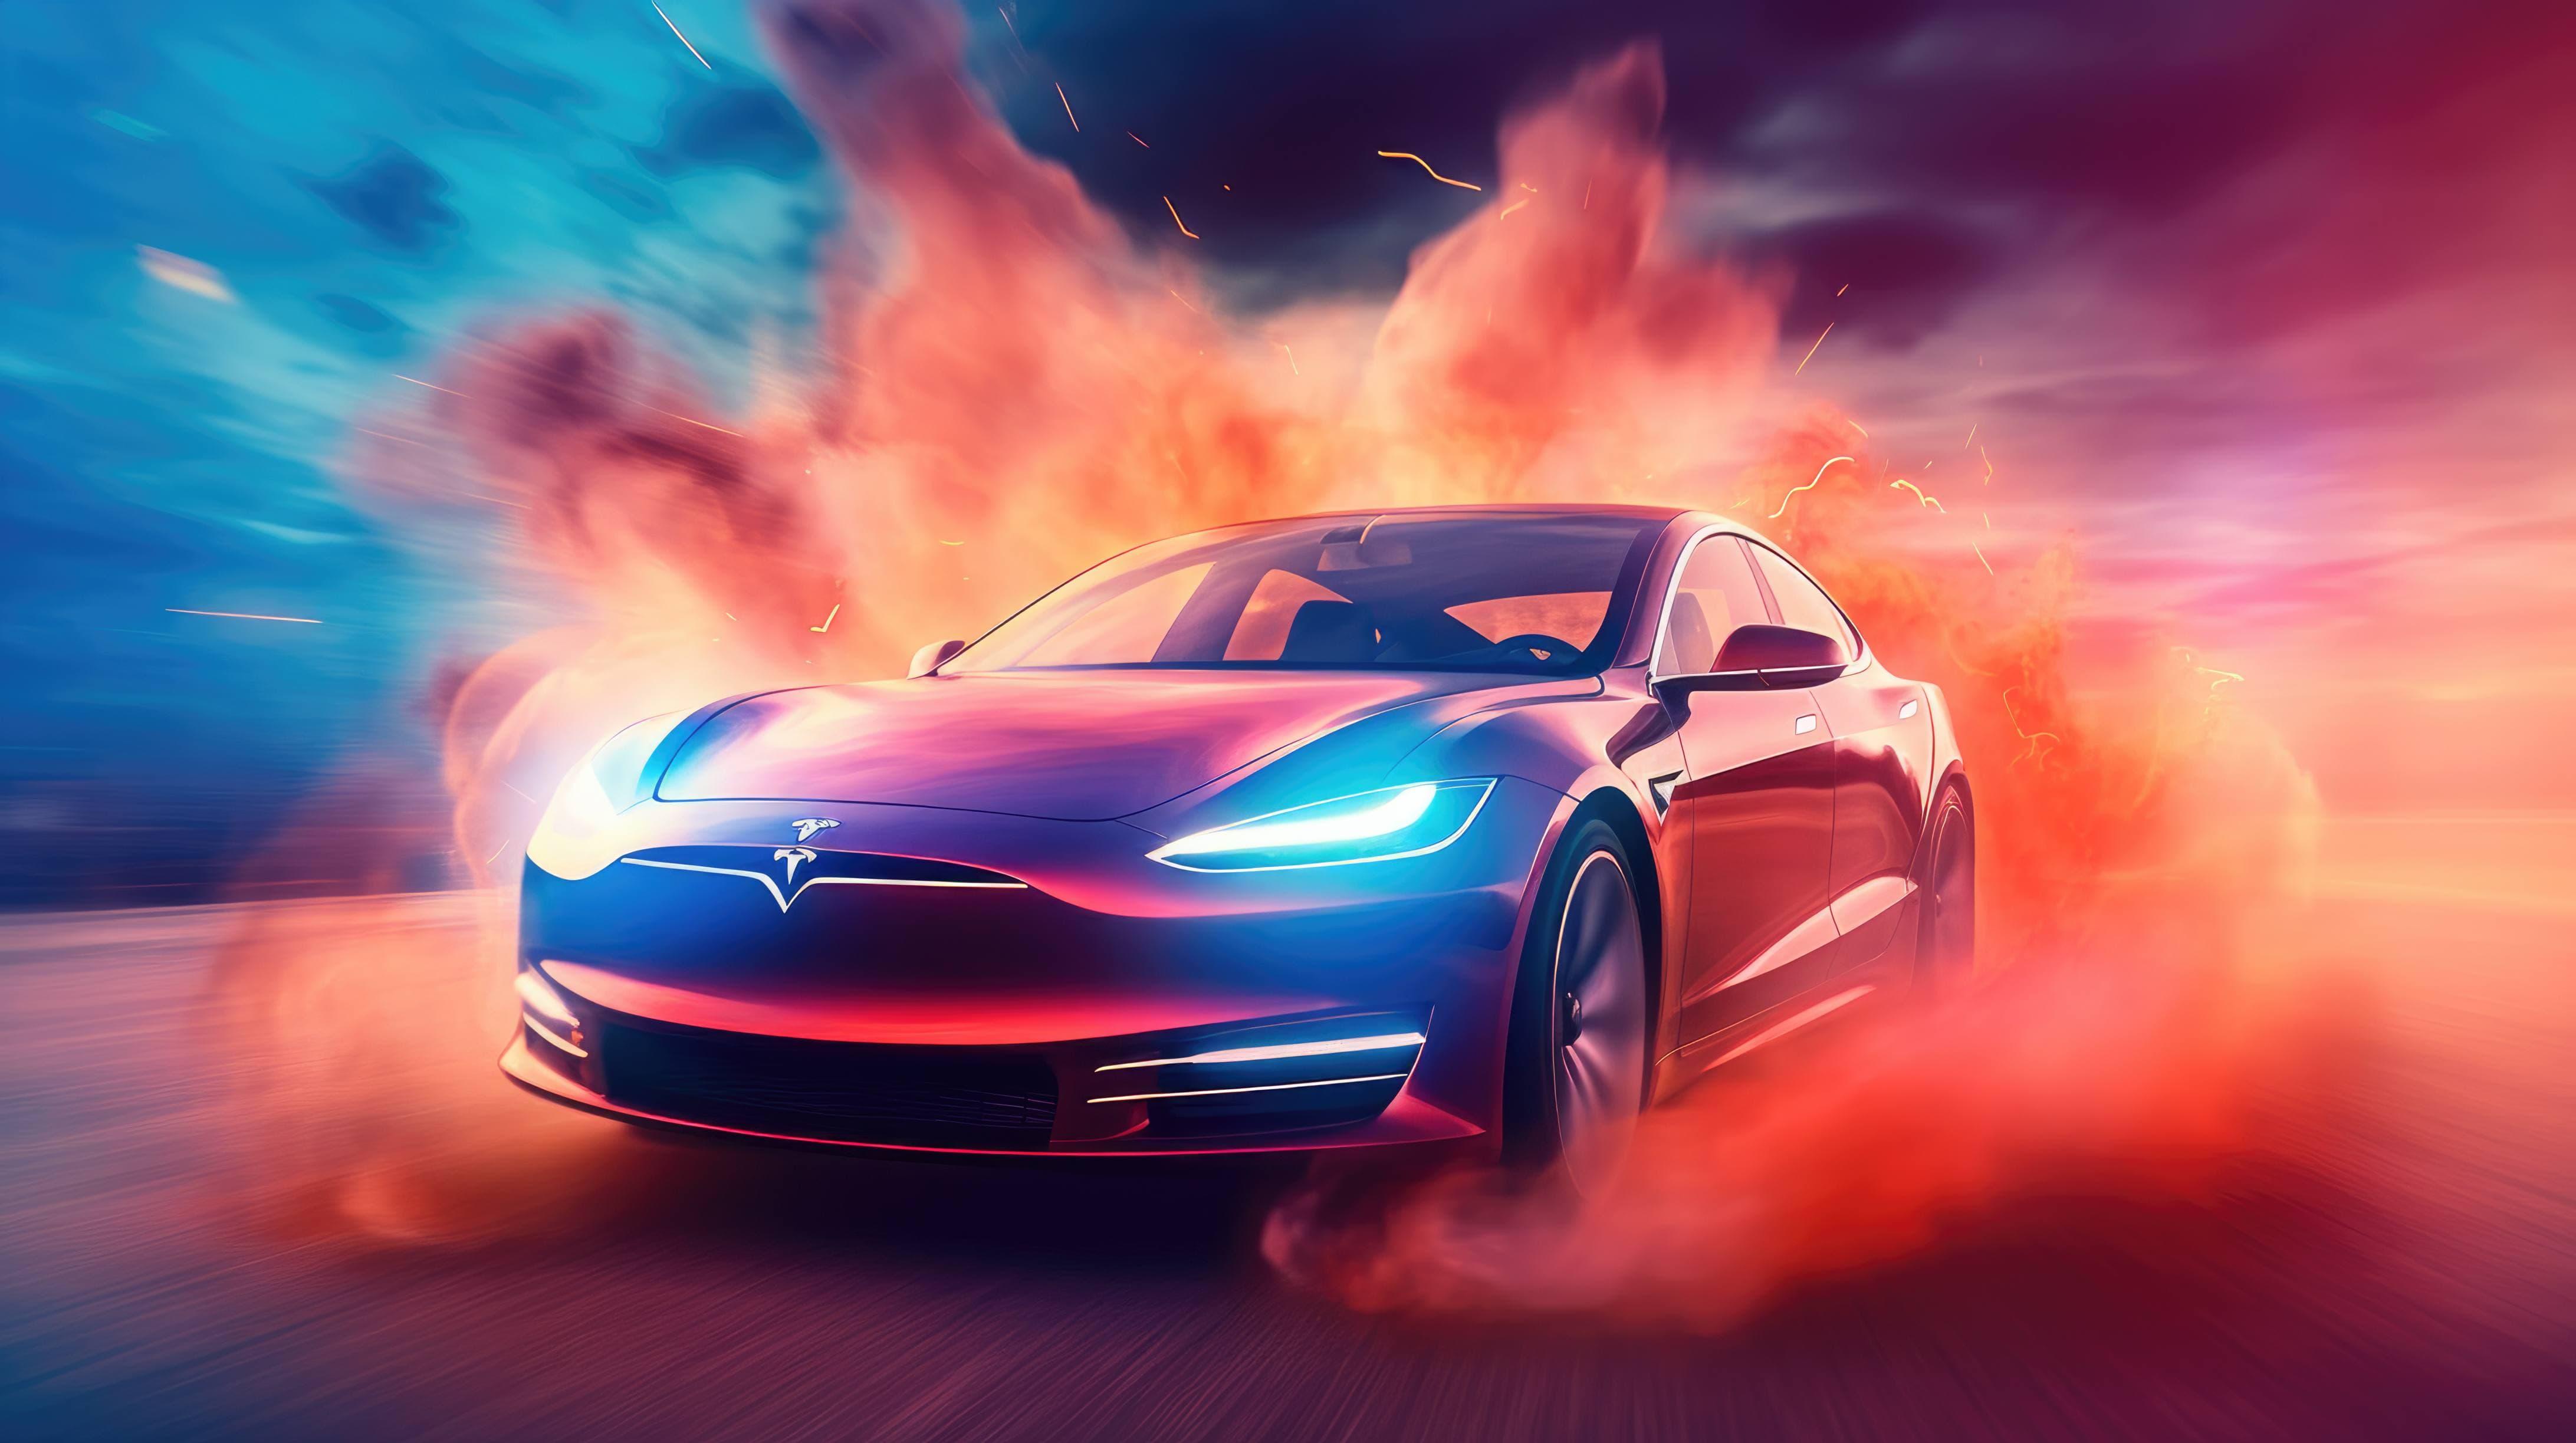 A 4k Ultra HD Wallpaper Of Red Tesla Model S Flying Through The Air